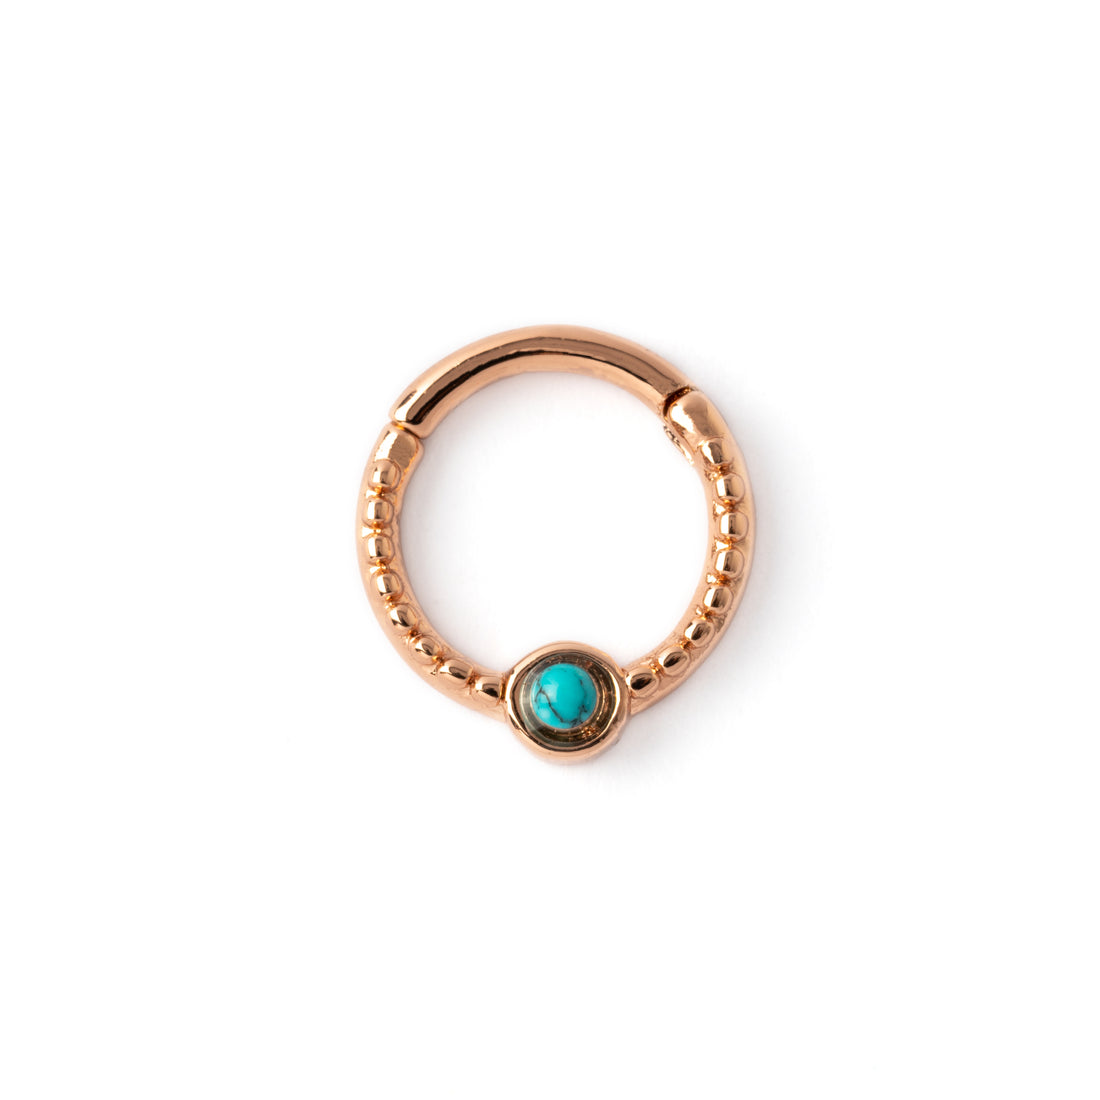 Dayaa rose gold surgical steel septum clicker with turquoise frontal view